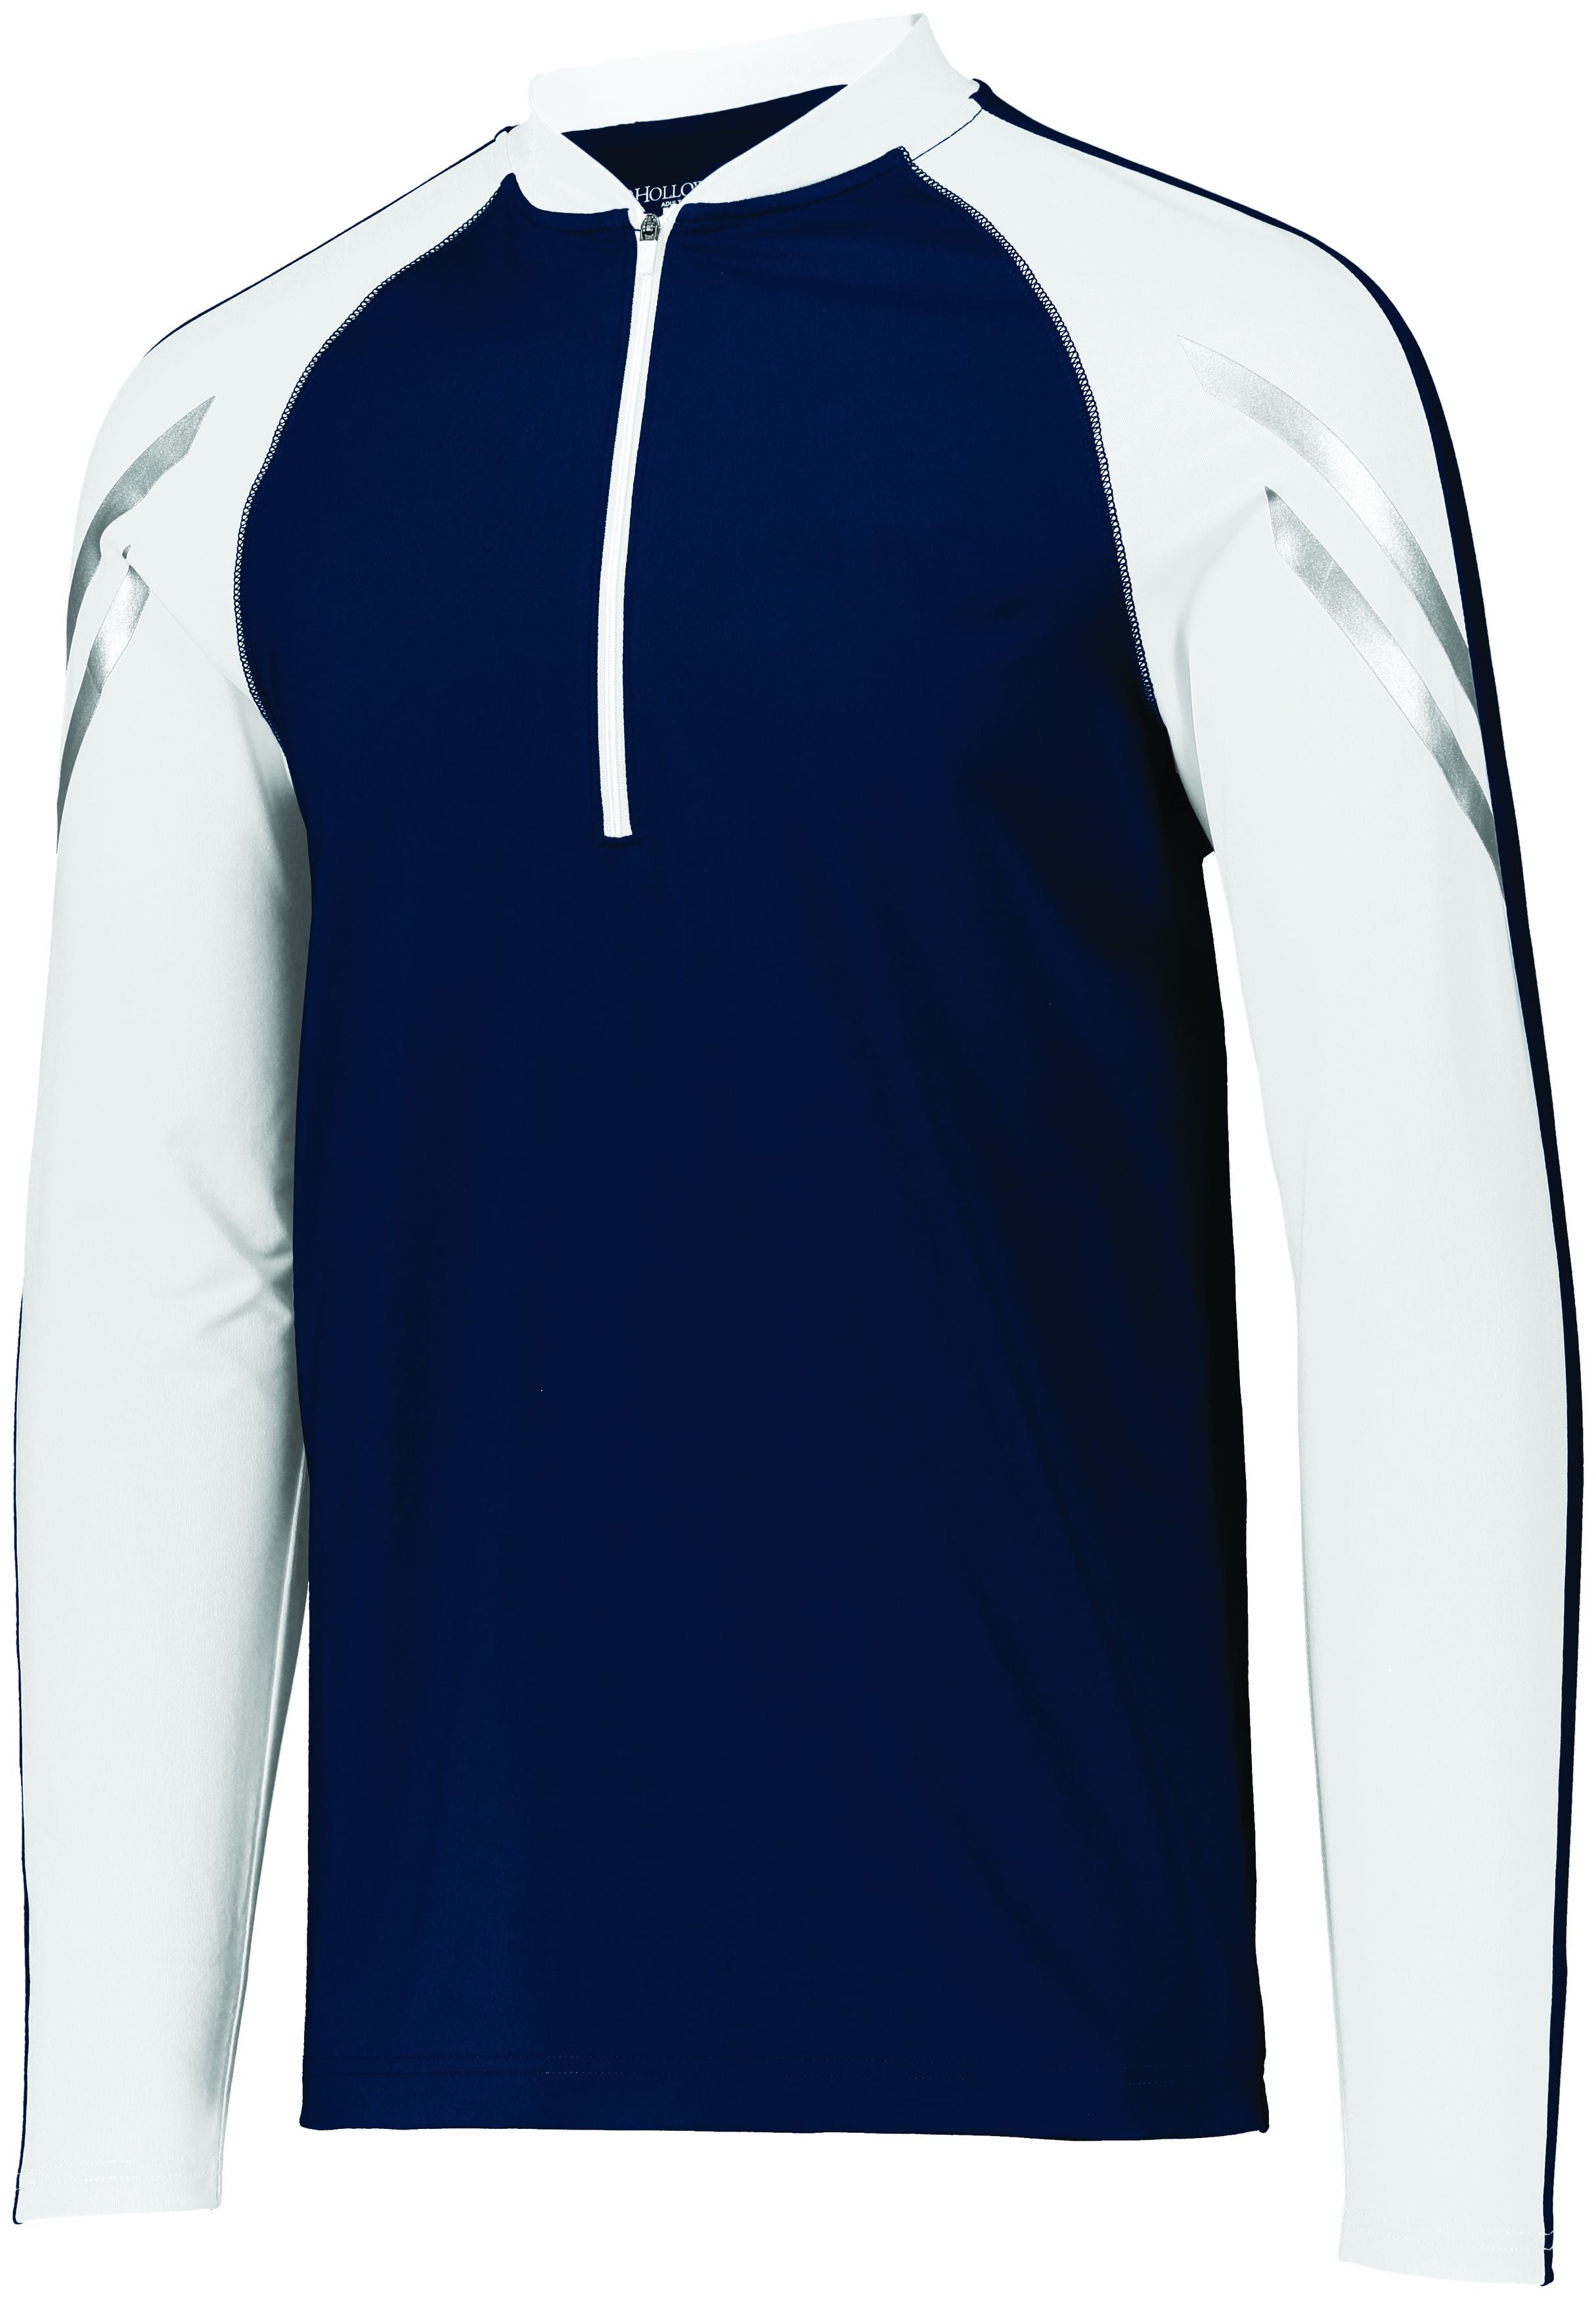 Holloway Flux 1/2 Zip Pullover in Navy/White  -Part of the Adult, Adult-Pullover, Holloway, Outerwear, Flux-Collection product lines at KanaleyCreations.com